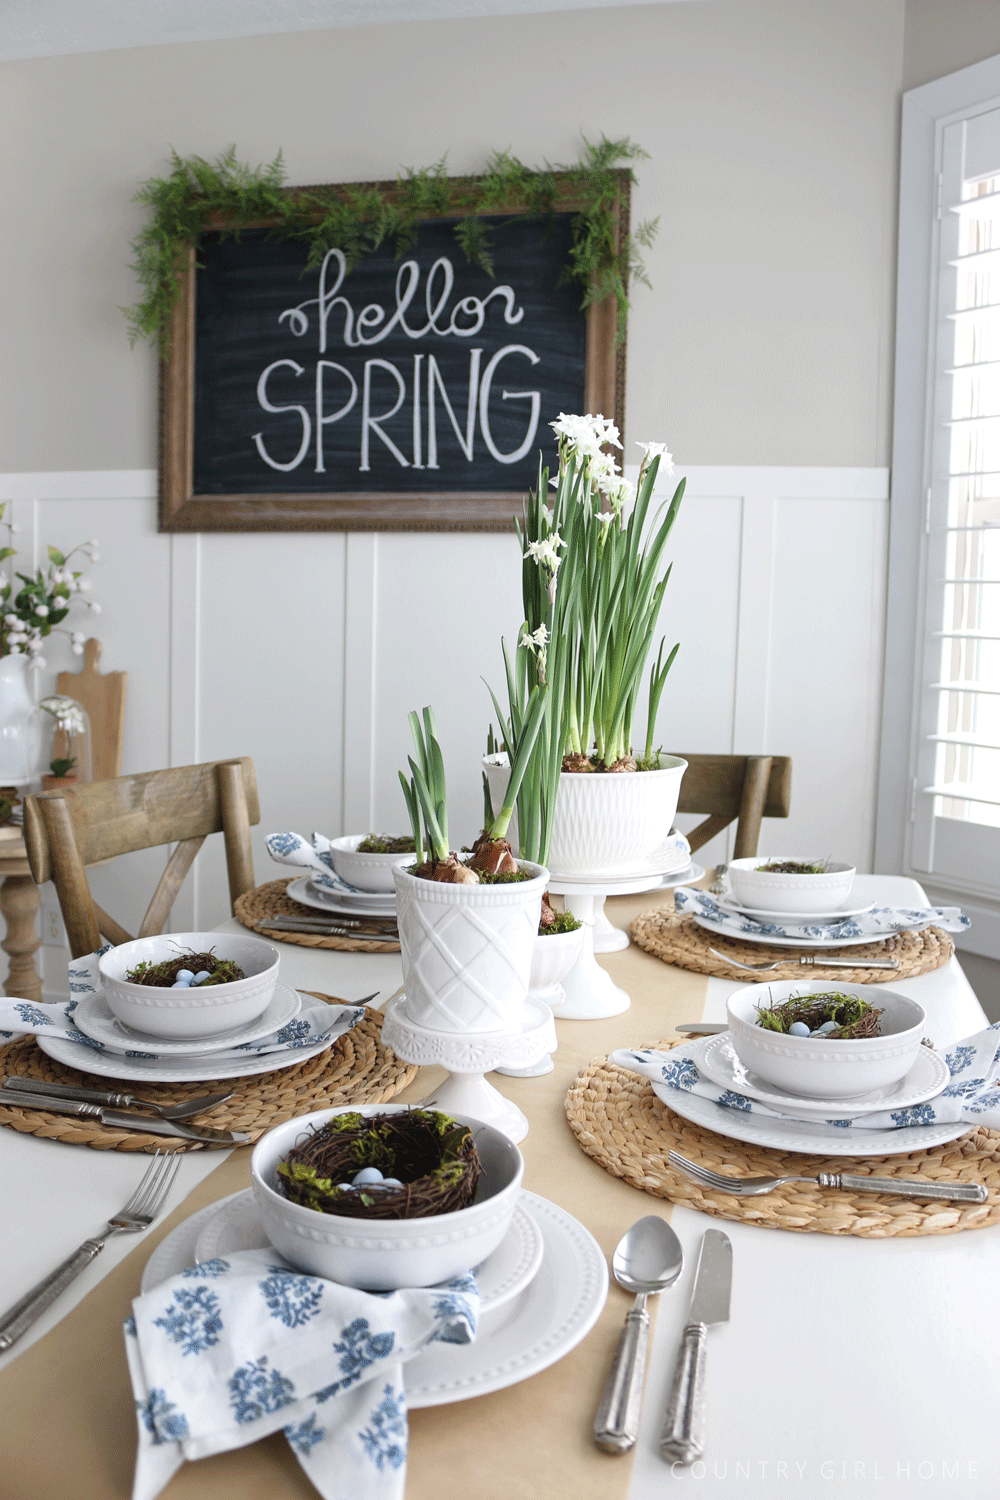 COUNTRY GIRL HOME : SIMPLE SPRING TABLESCAPE